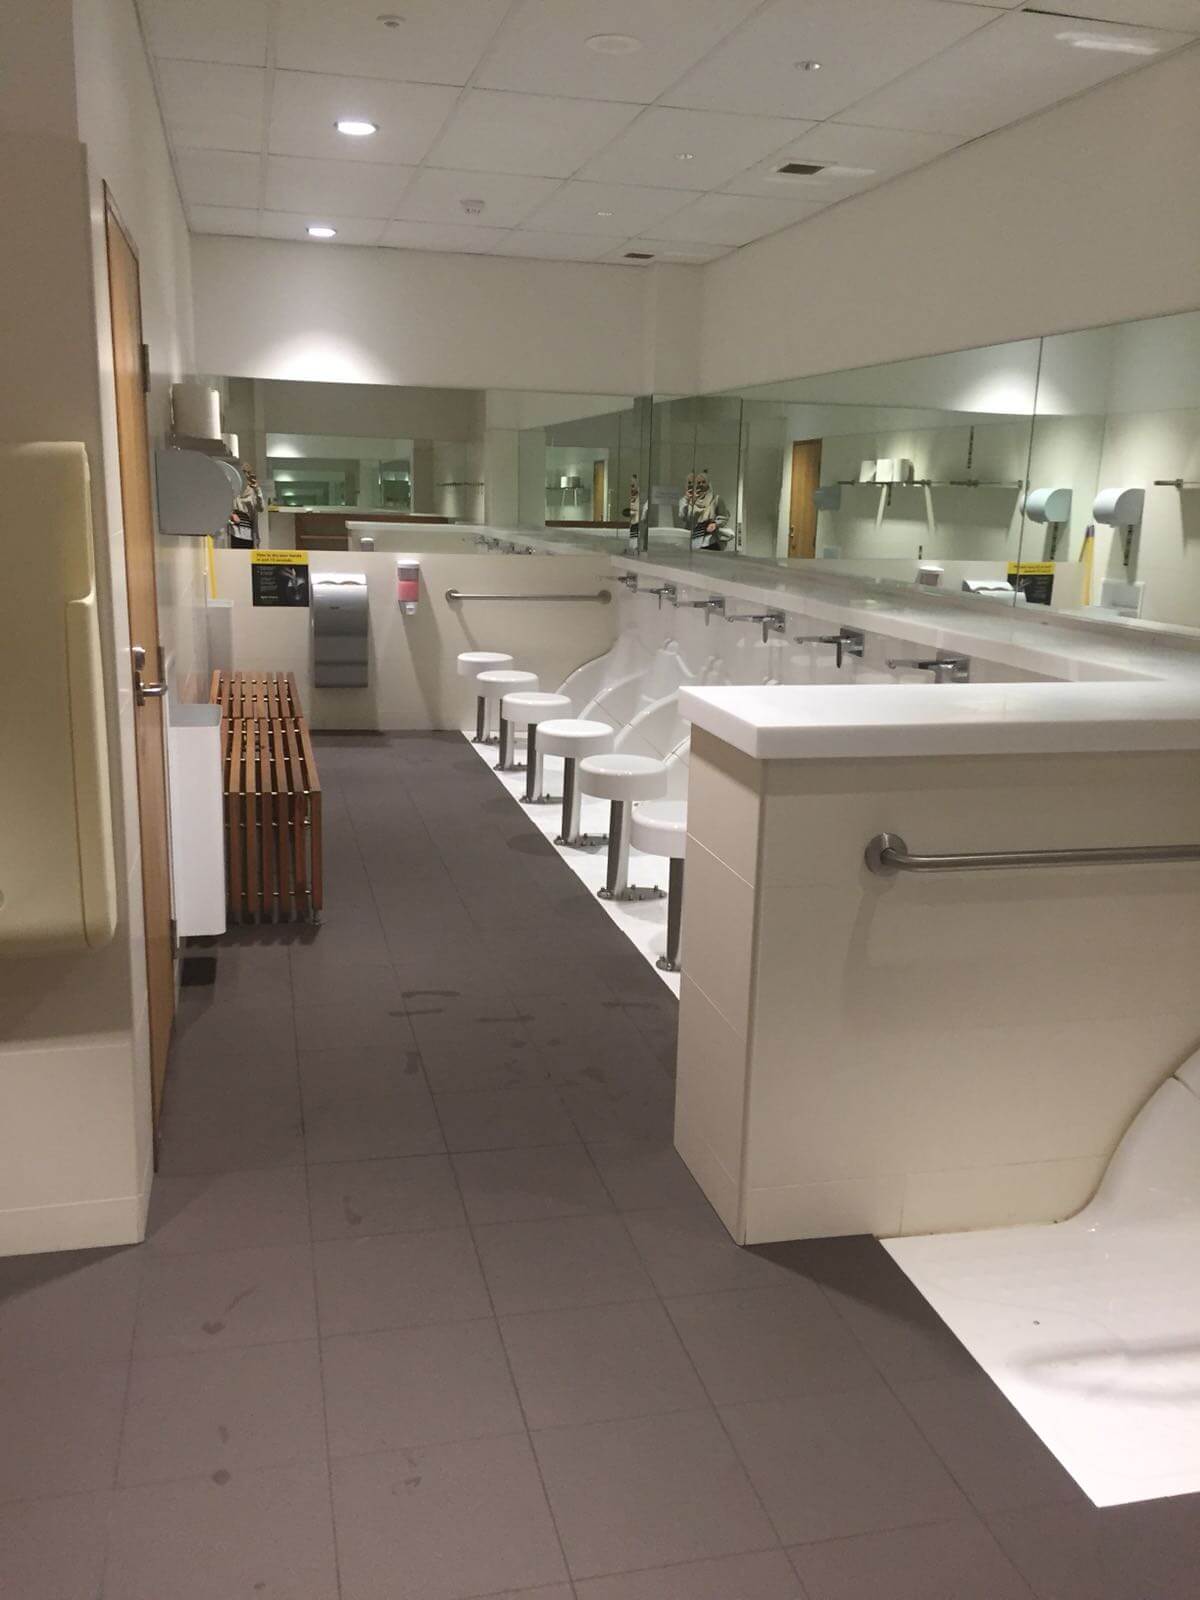 Sister's Wudu Area at ISOC UNSW